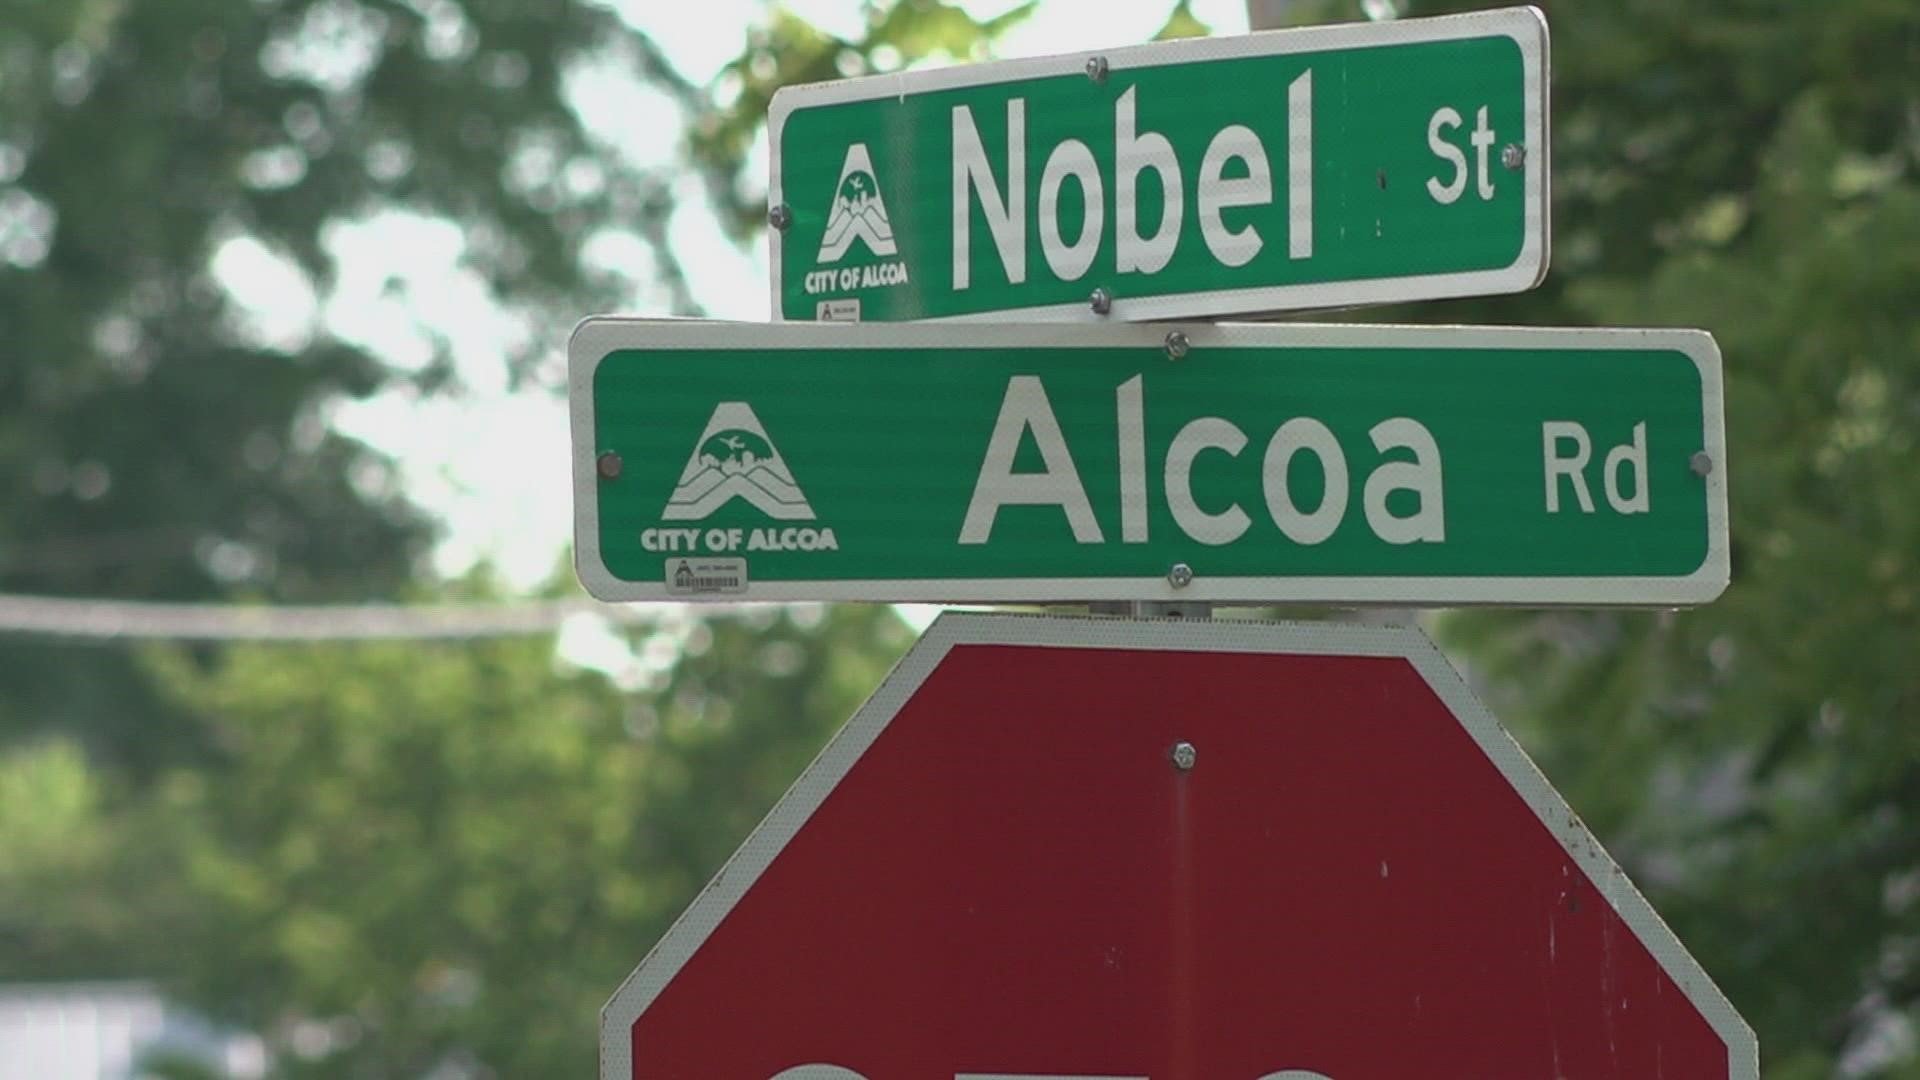 The original streets are named for scientists, engineers and some for company officials within the early days of Alcoa.